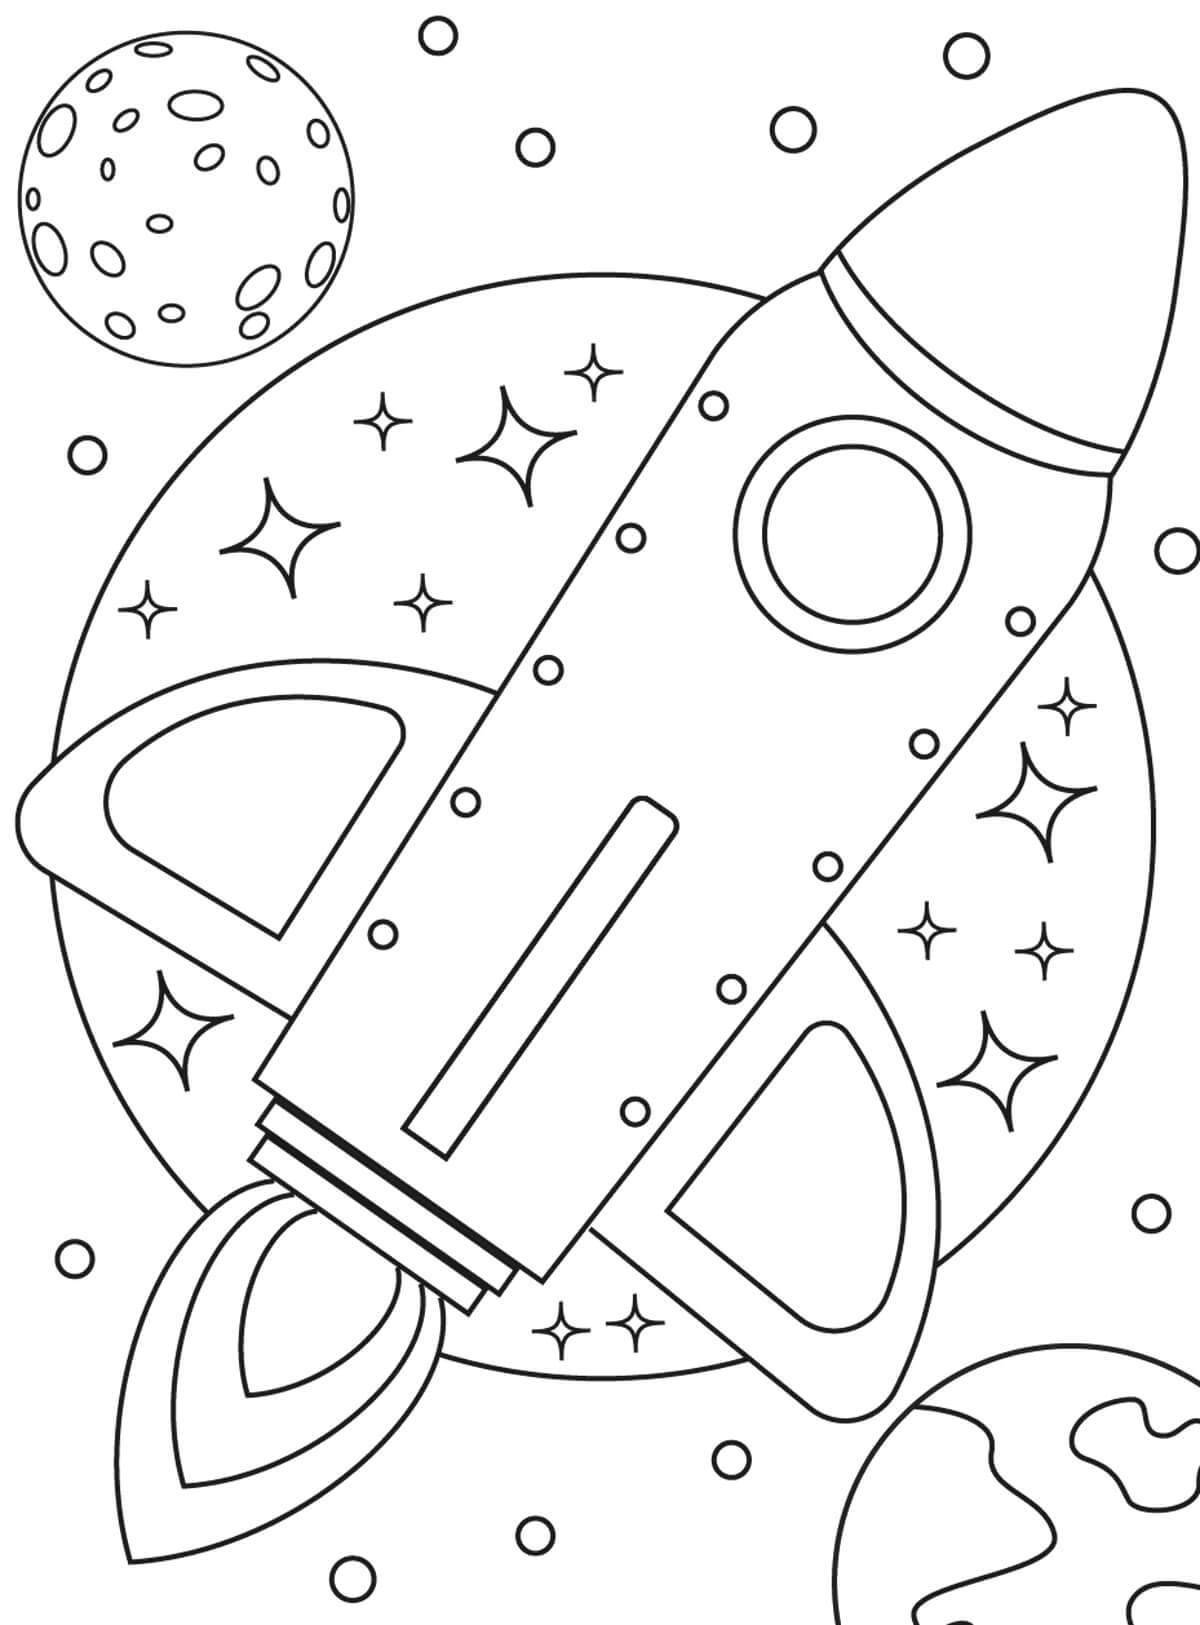 Colourful universe coloring book for children 4-5 years old